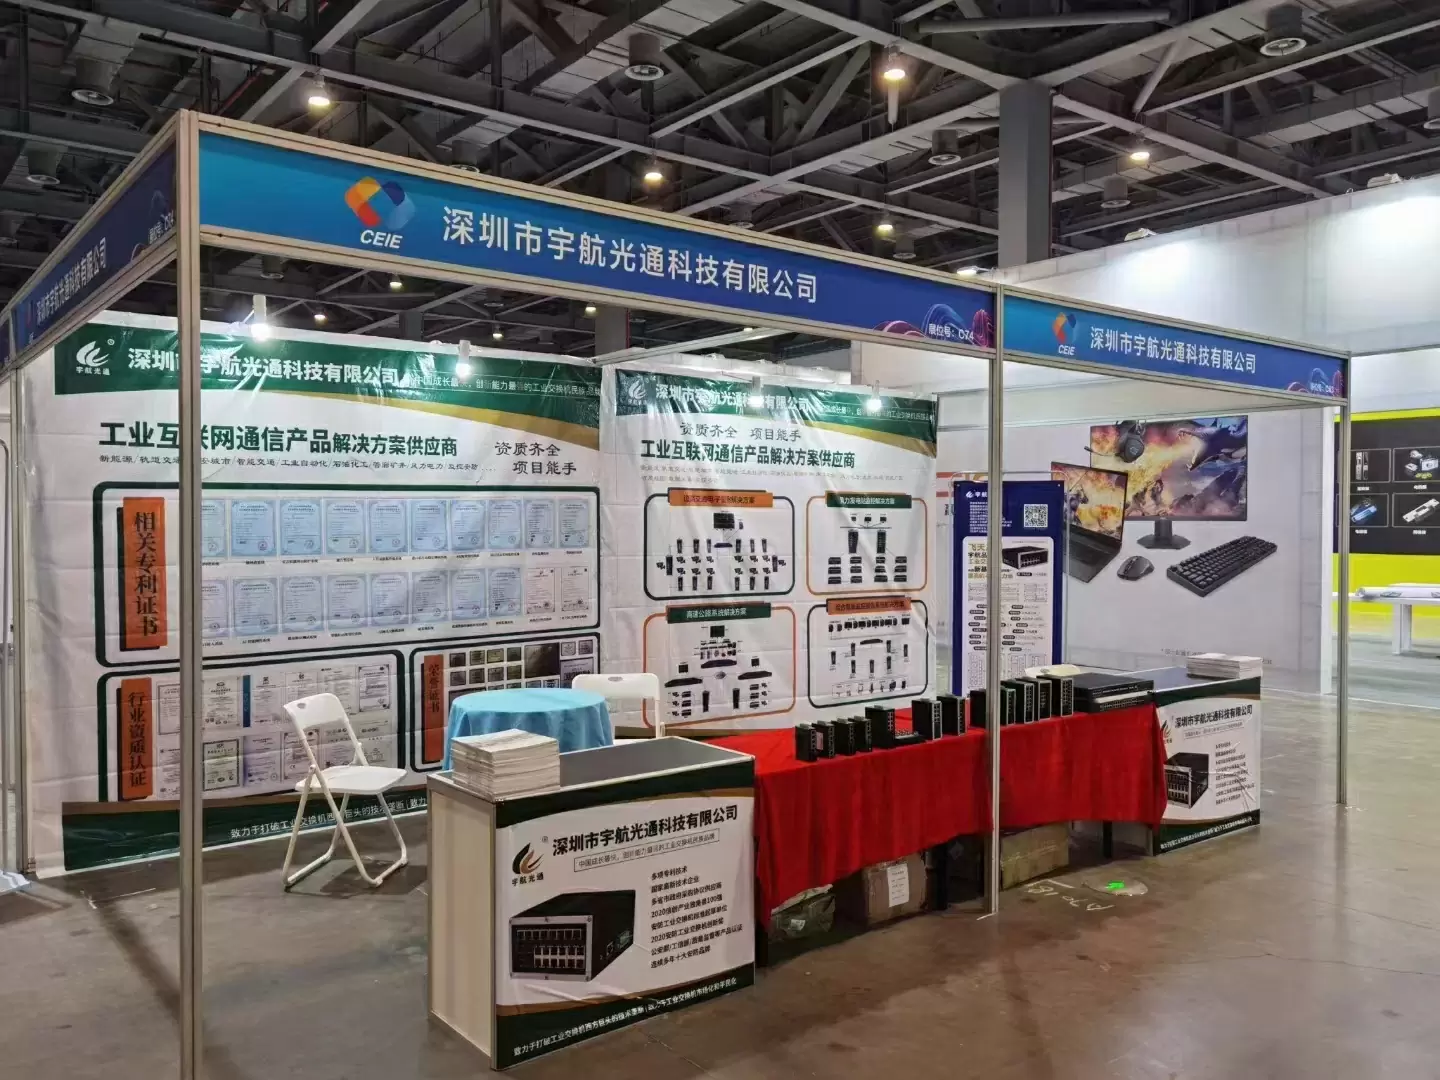 2022 International Telecommunication and Electronics Industry Conference hold in Nanchang City, Jiangxi Province.